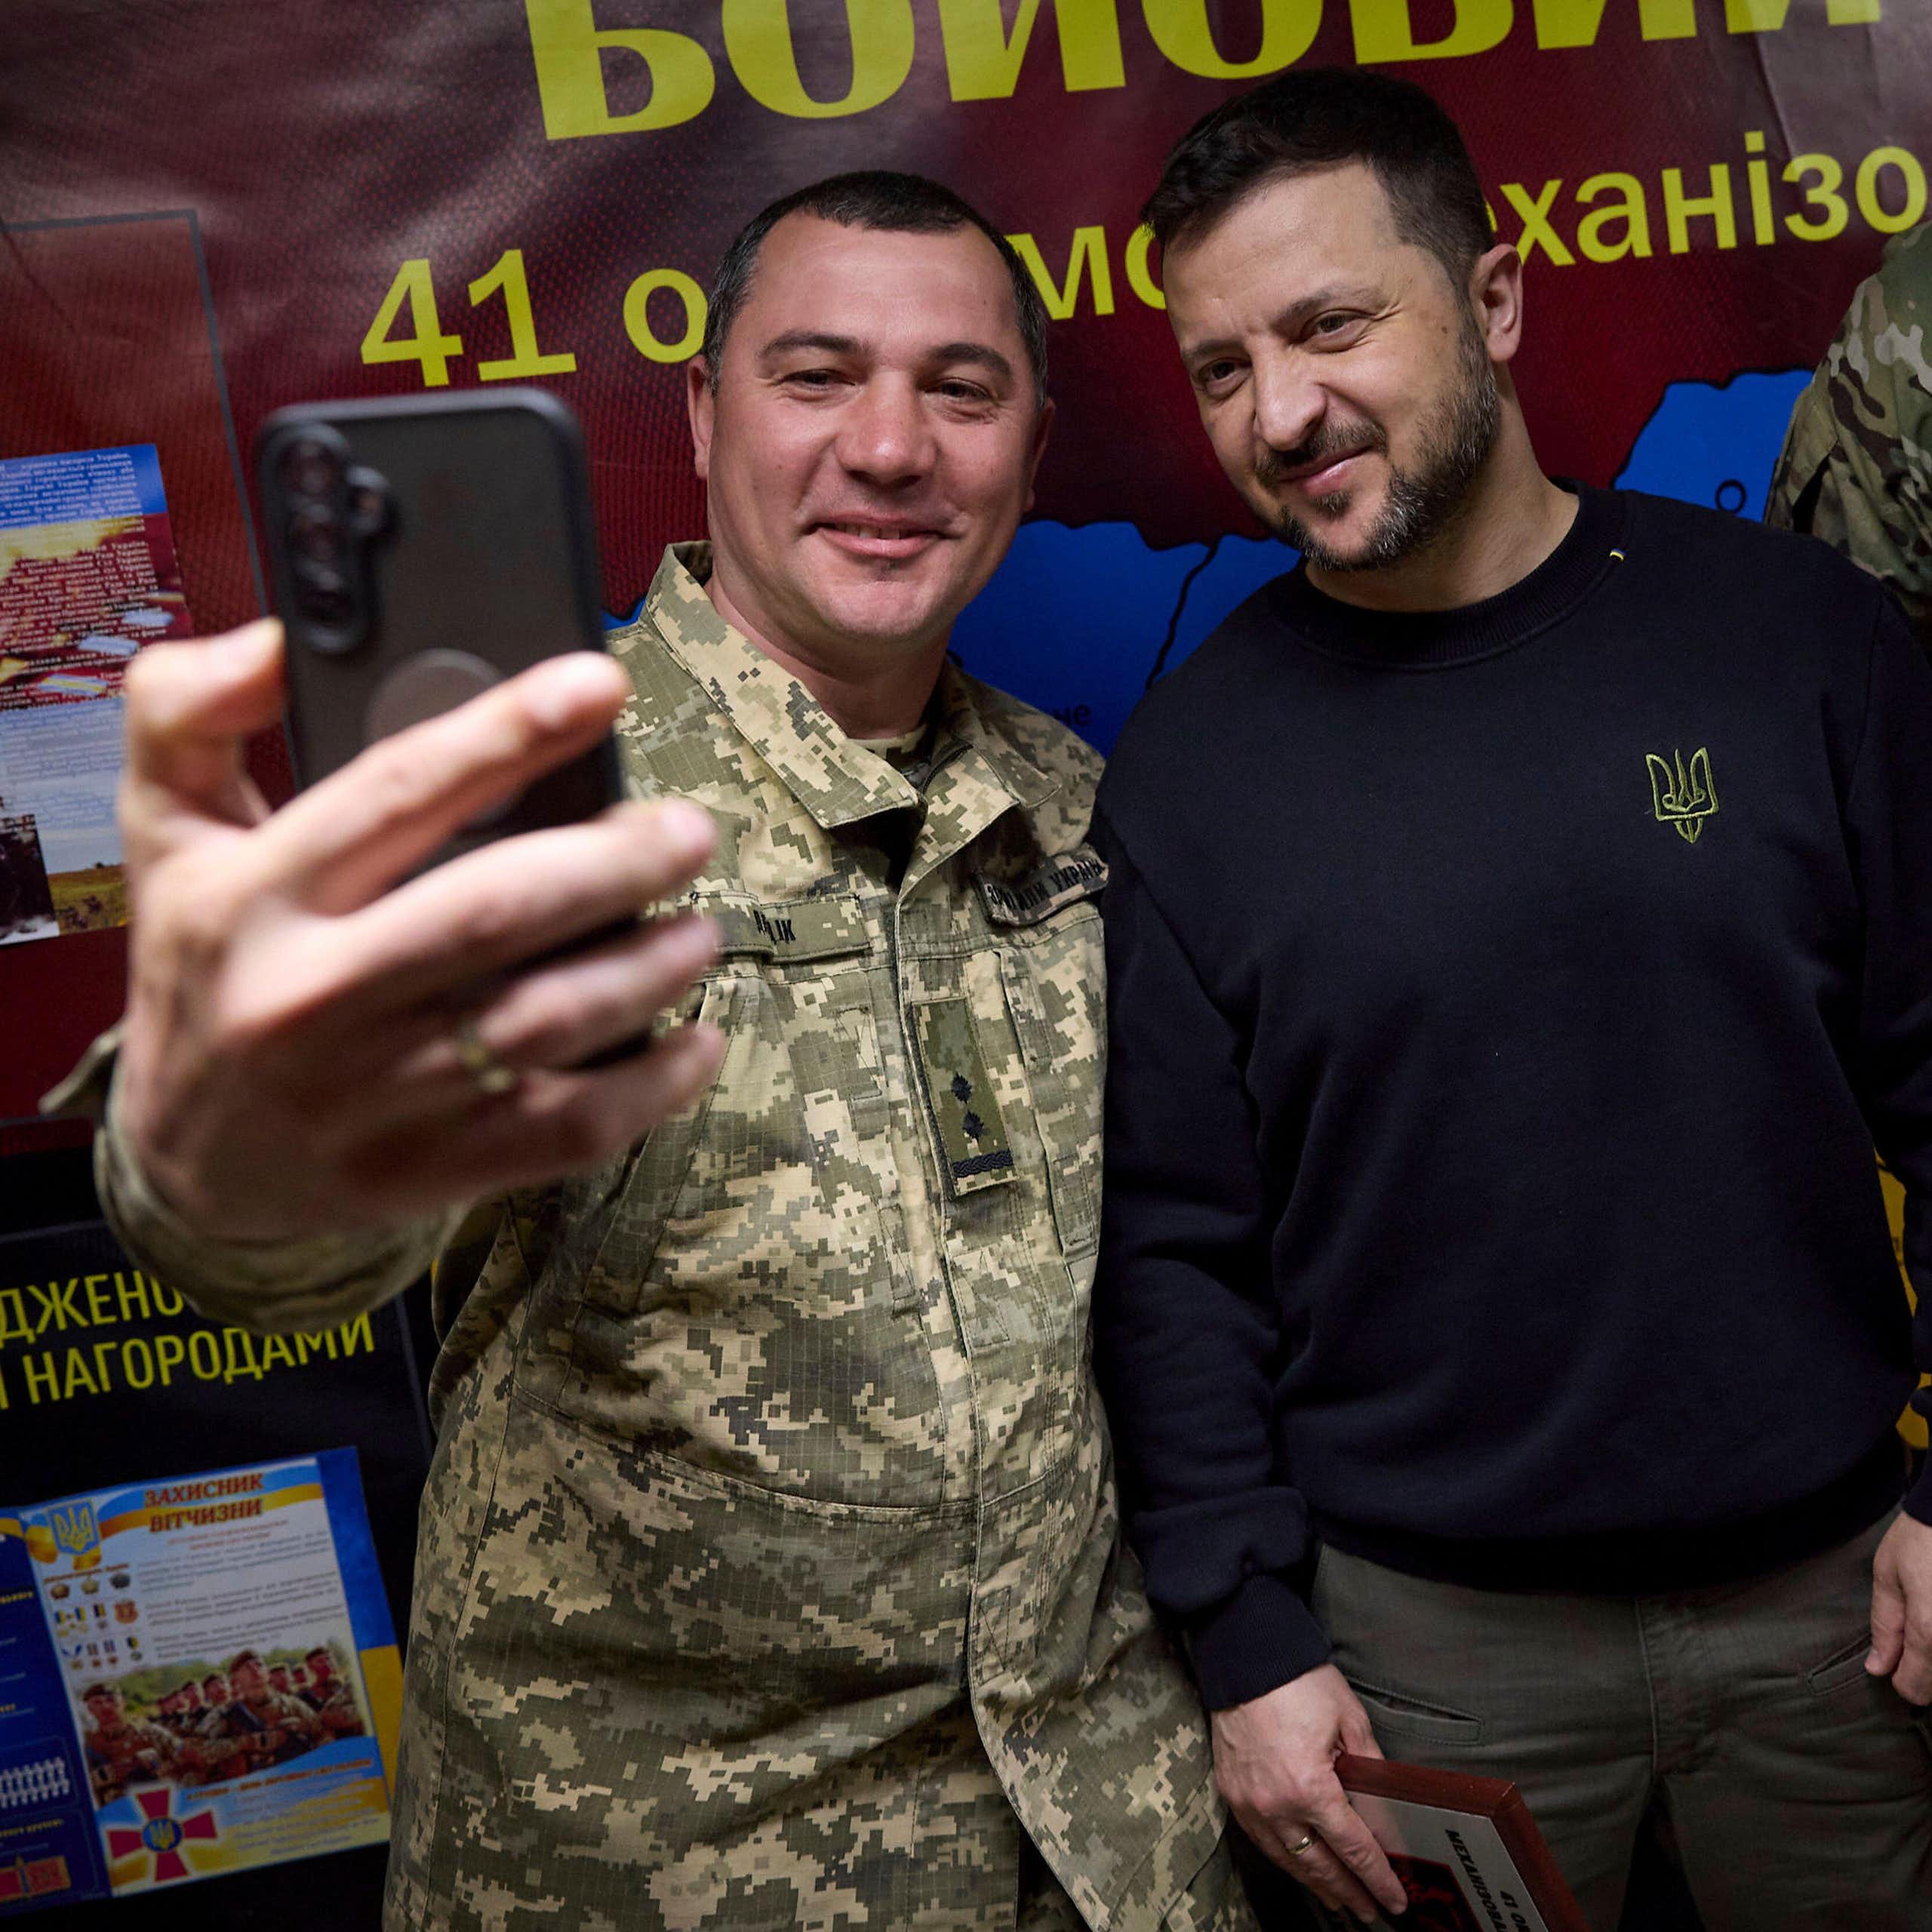 A Ukrainian soldier takes a selfie with VOlodymyr Zelensky, May 2024.